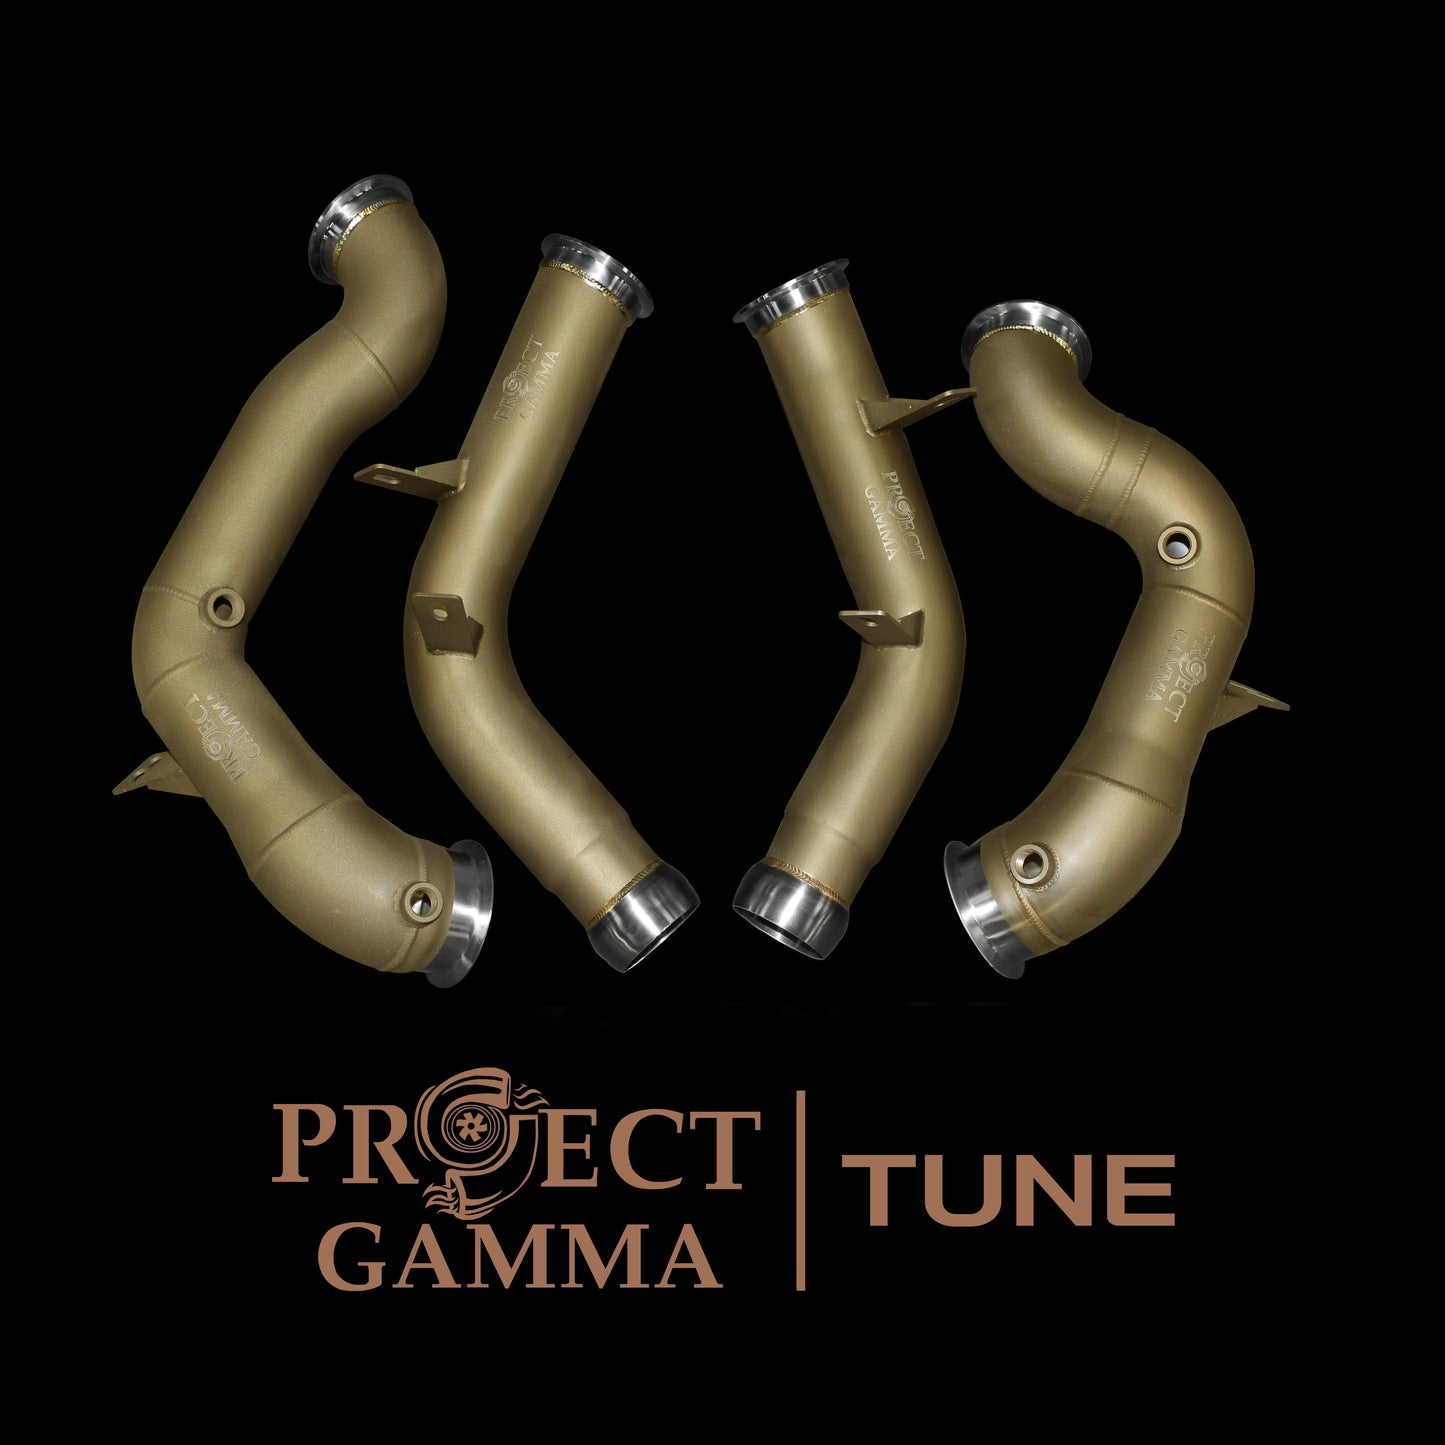 Project Gamma Mercedes-Benz GT63 | E63 Downpipes and Project Gamma Tune Package WTGT63C